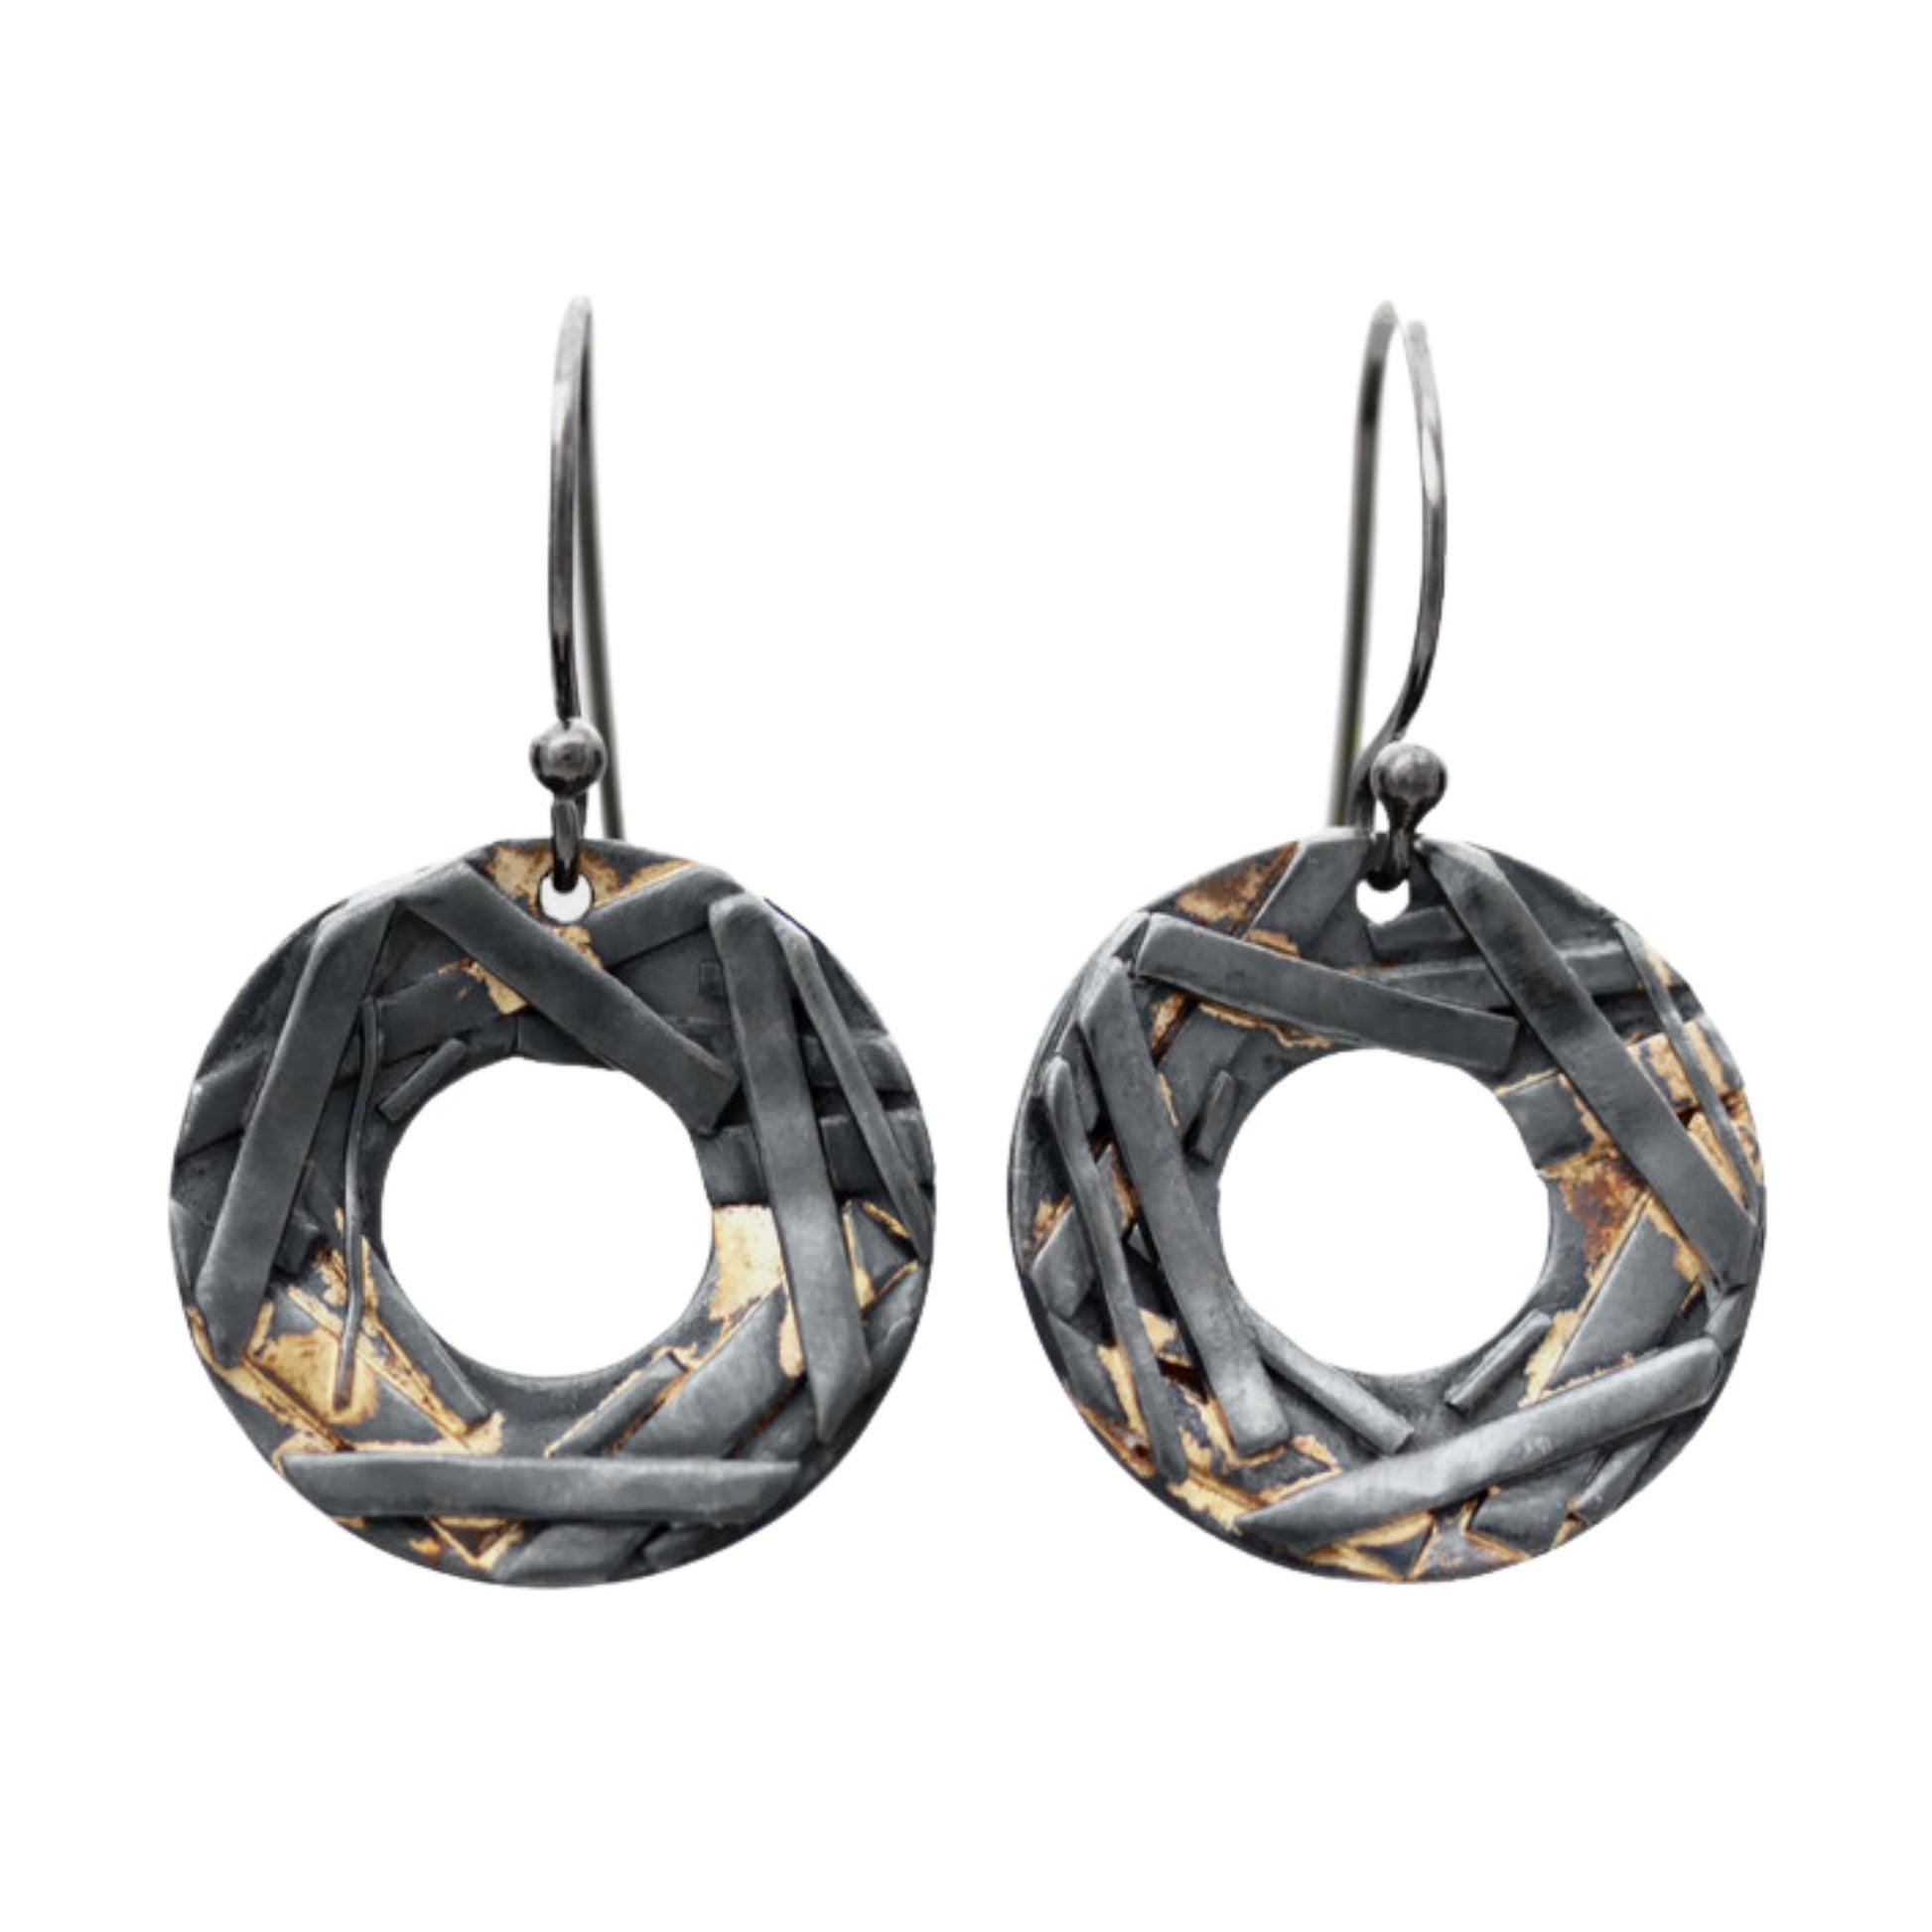 Round washer mixed metal earrings by Jen Lesea Designs